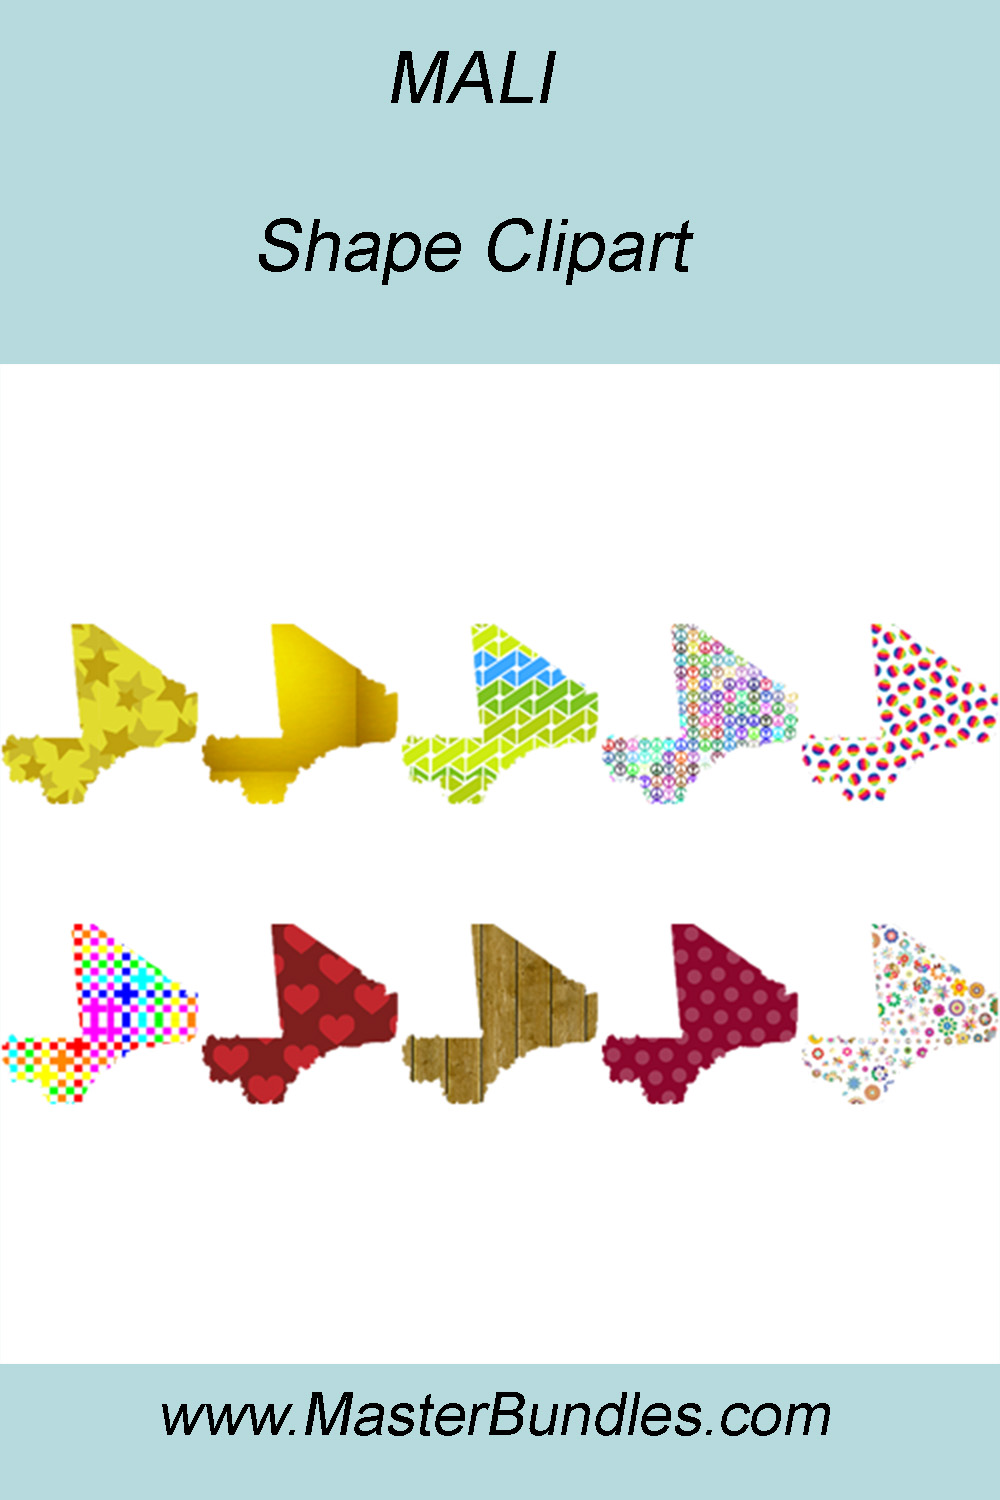 MALI SHAPE CLIPART ICONS pinterest preview image.